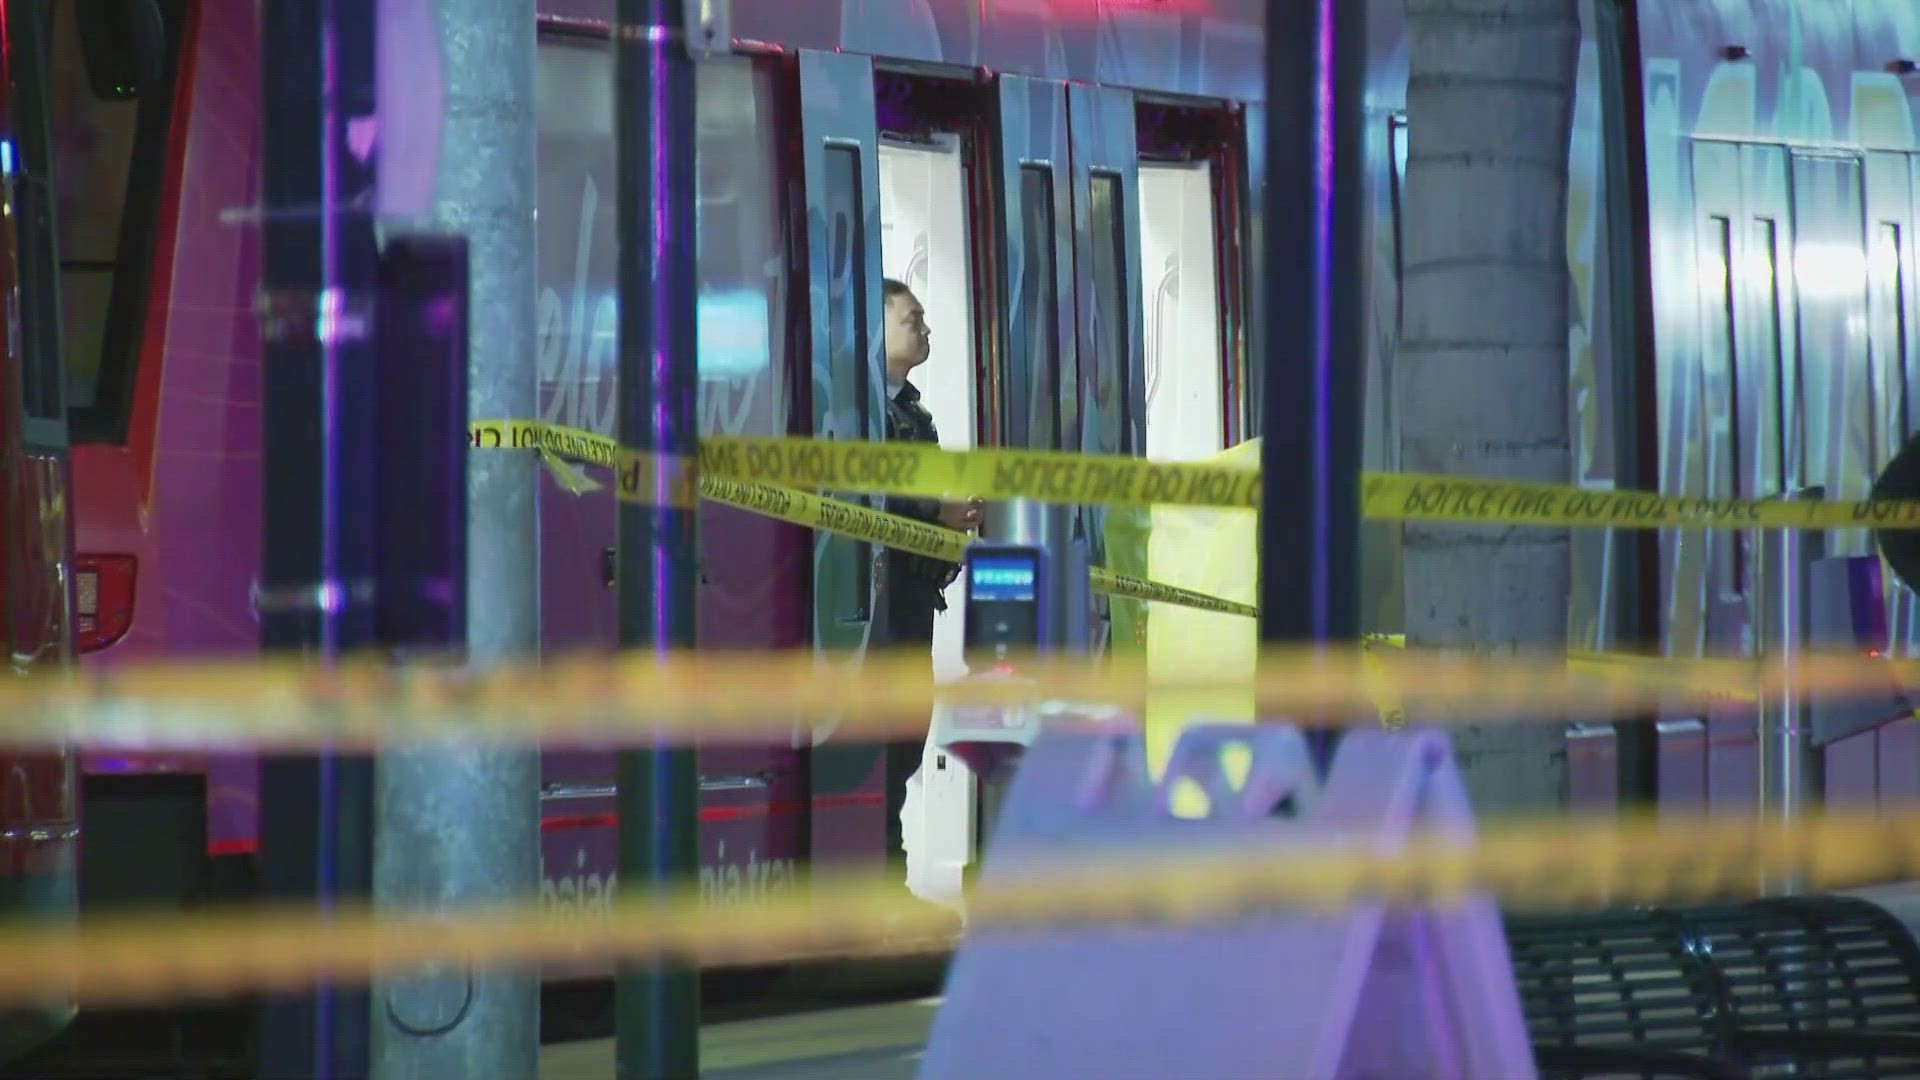 A man who was allegedly armed with a gun was shot and killed by Metropolitan Transit Security, according to authorities.